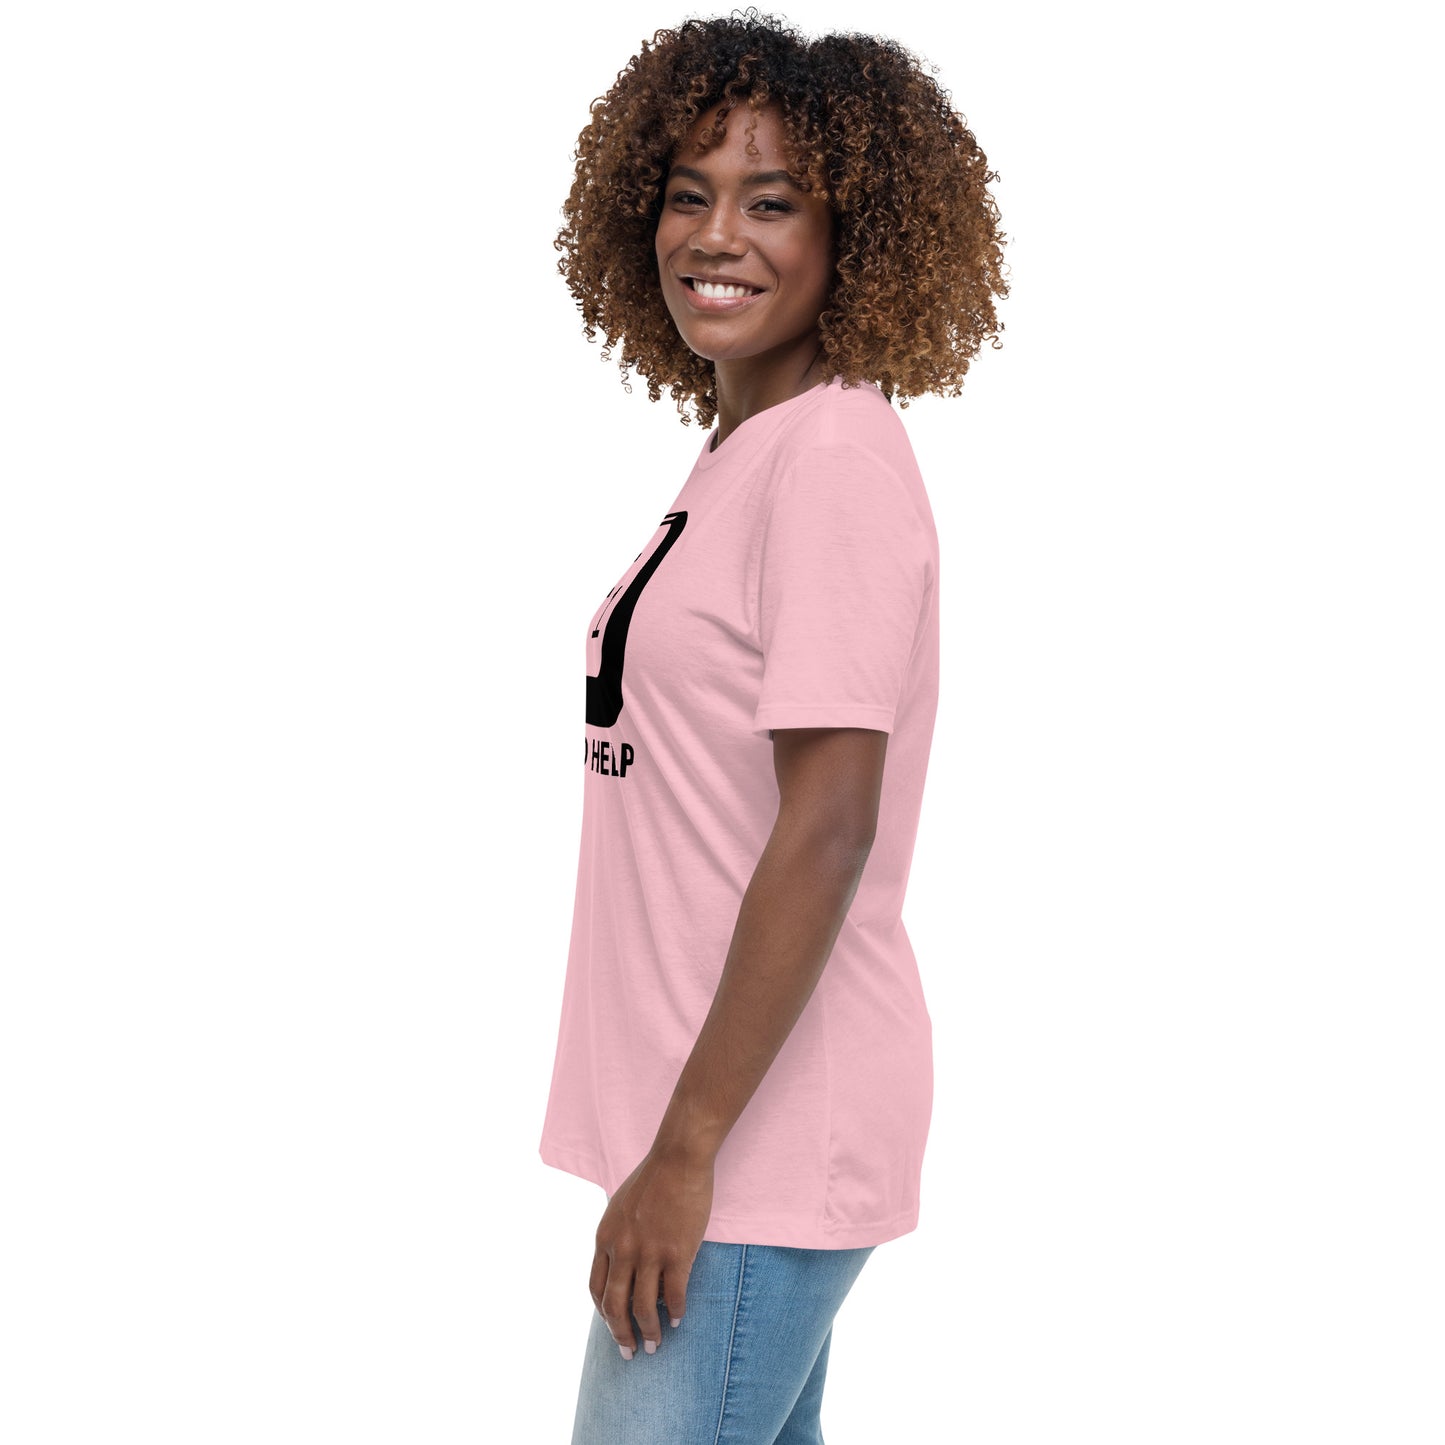 Woman with pink t-shirt with picture of "F1" key and text "I need help"